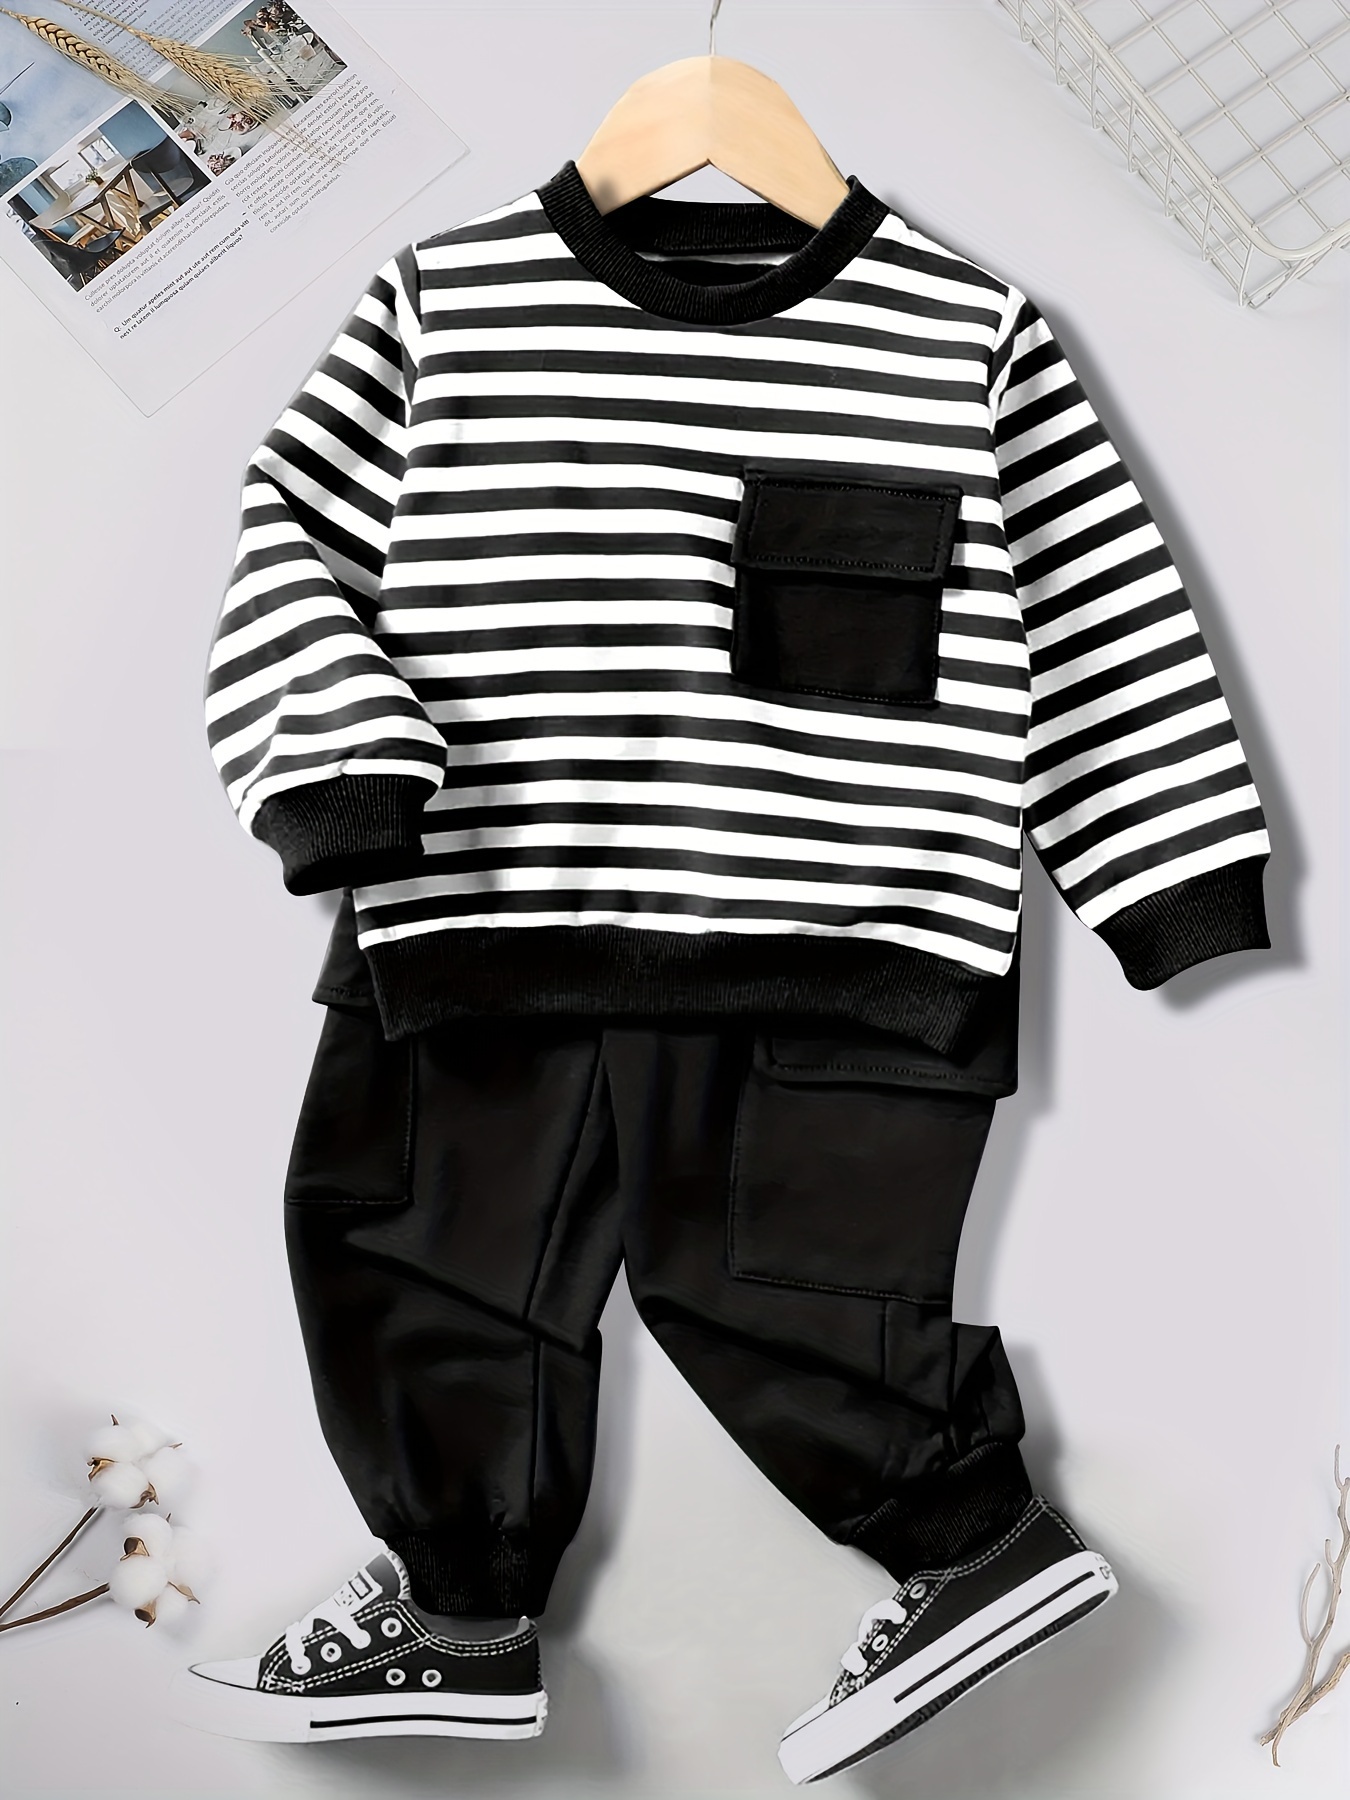 Boy's Vintage Style Outfit 2pcs, Colorful Stripe Shirt & Cargo Pants Set,  Kid's Clothes For Spring Fall Vacation